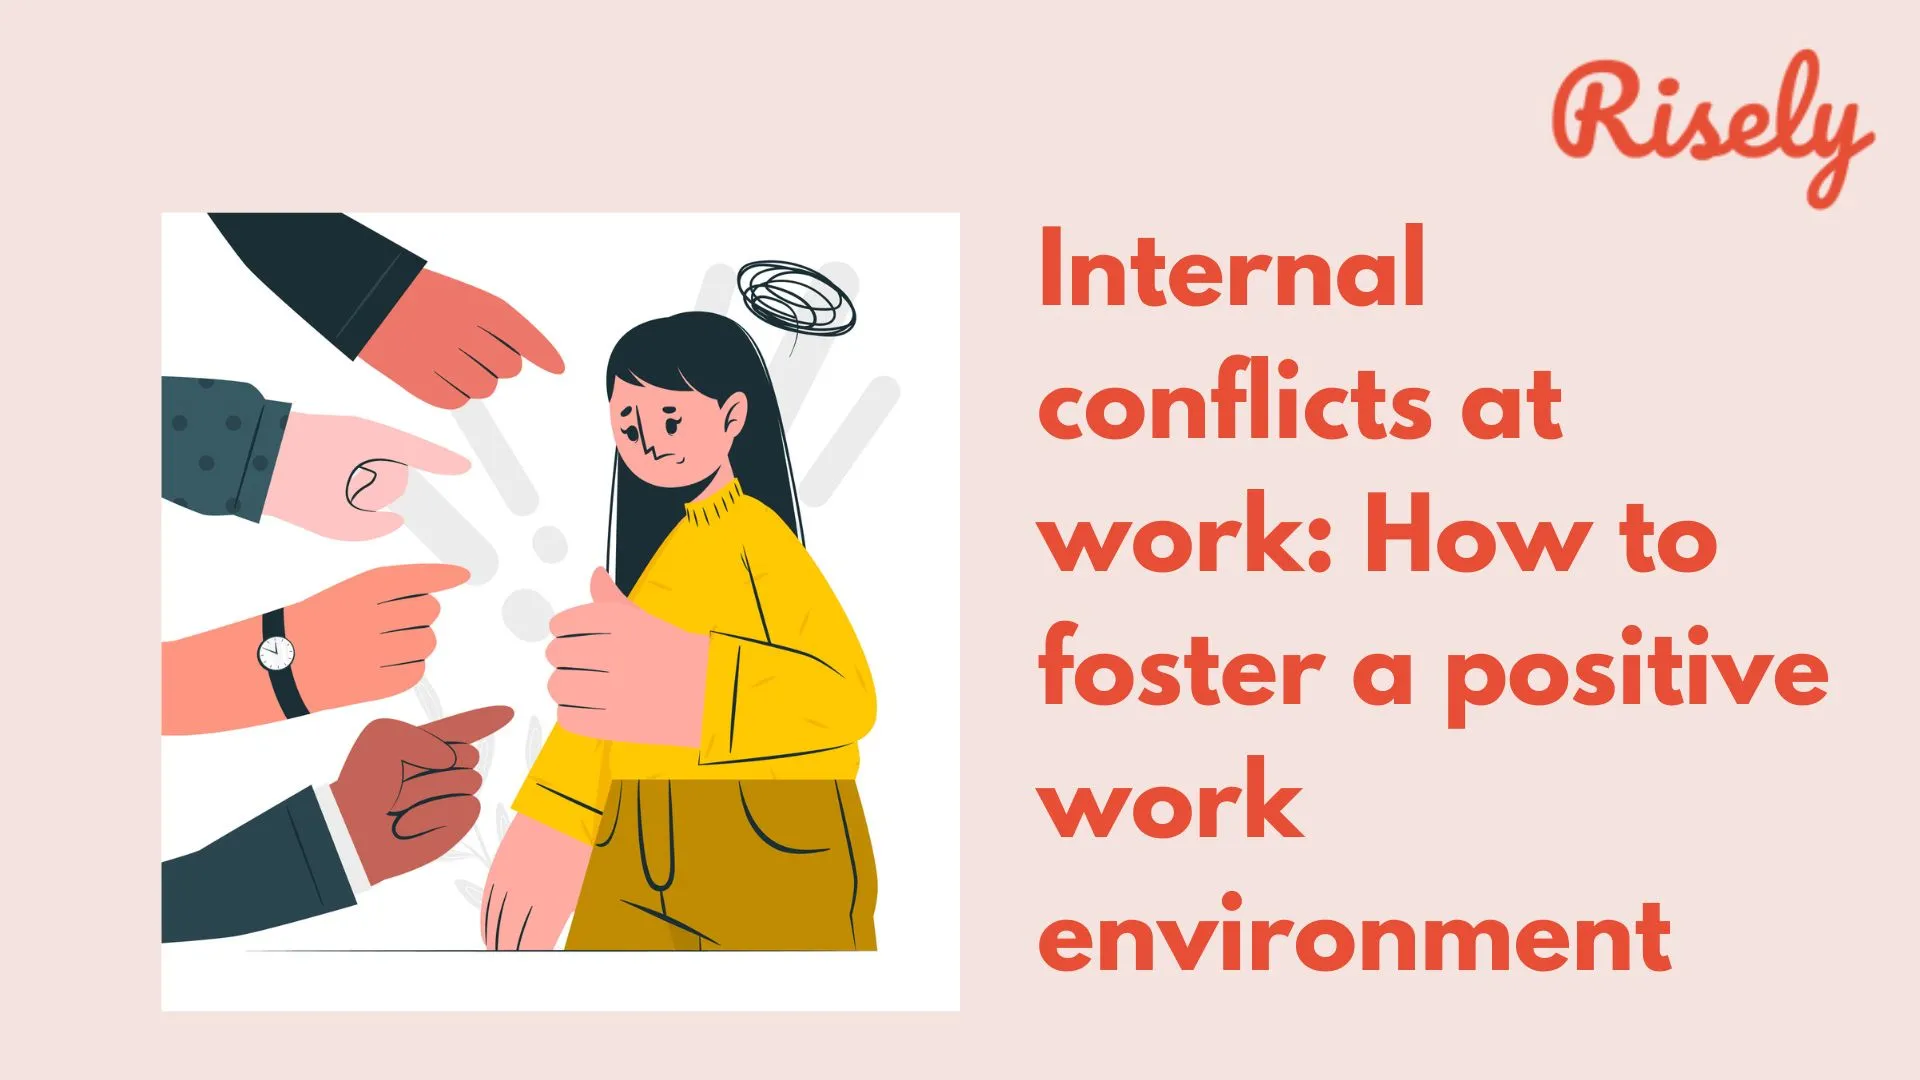 Internal conflicts at work: How to foster a positive work environment